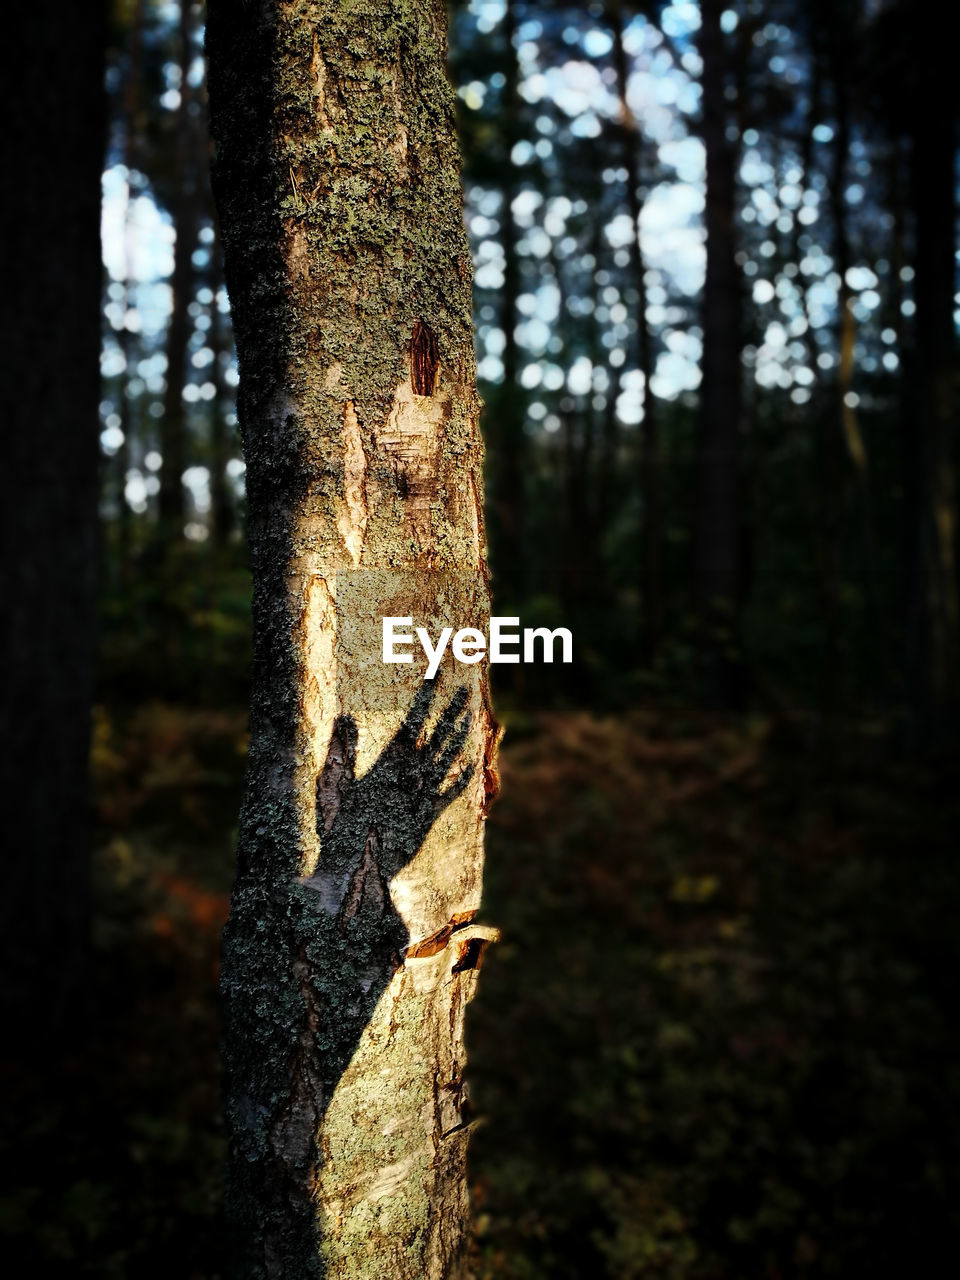 VIEW OF TREE TRUNK AGAINST BLURRED BACKGROUND